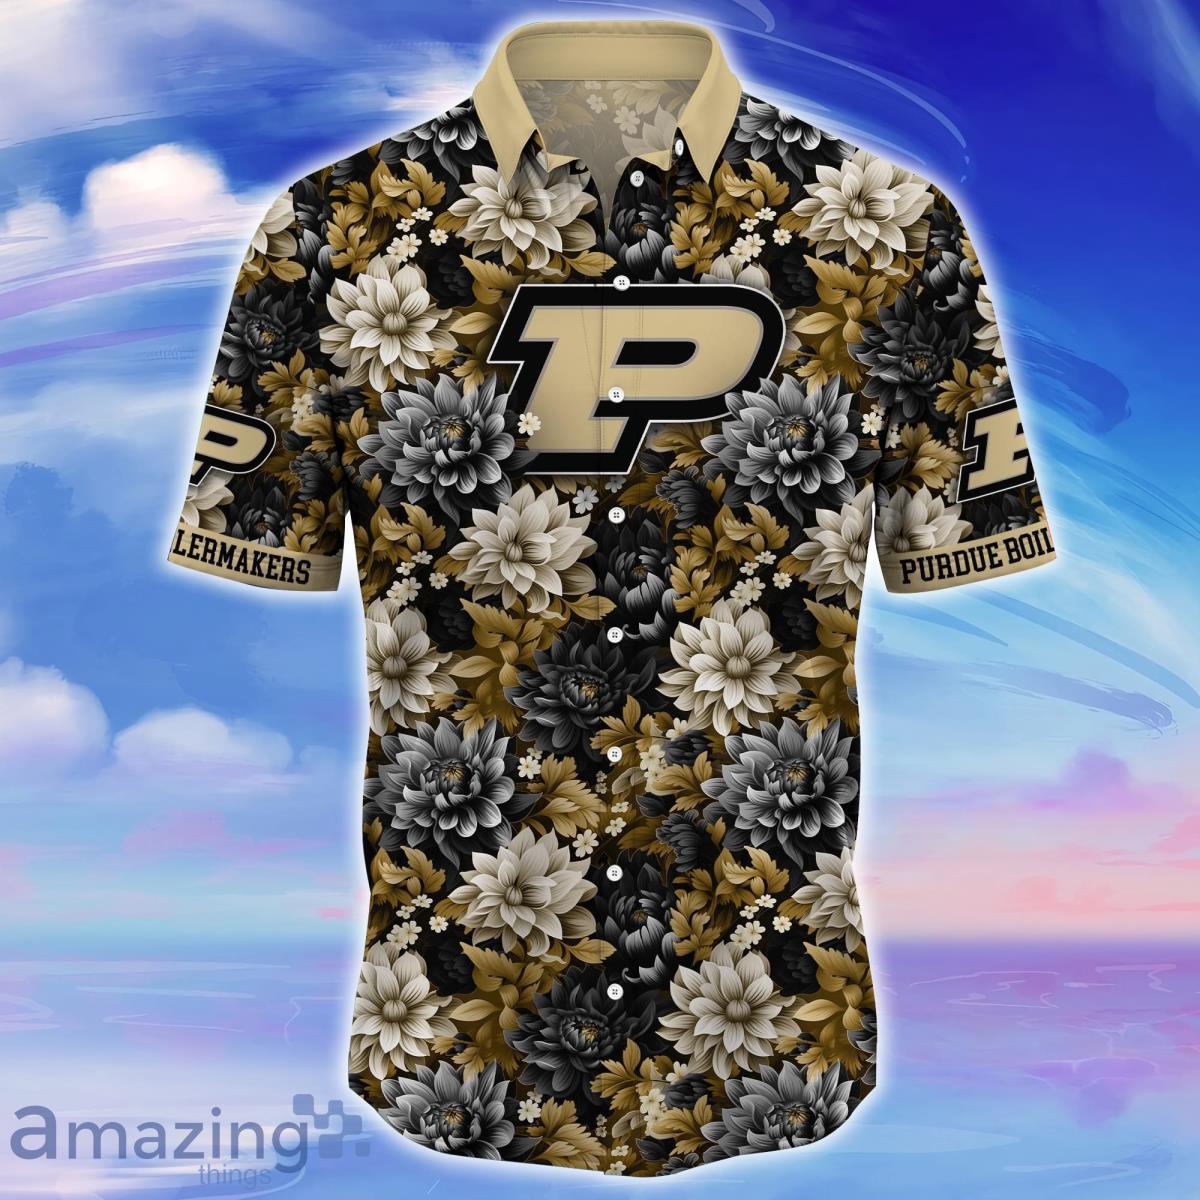 Purdue Boilermakers Trending Hawaiian Shirt Great Gift For Fans Product Photo 2